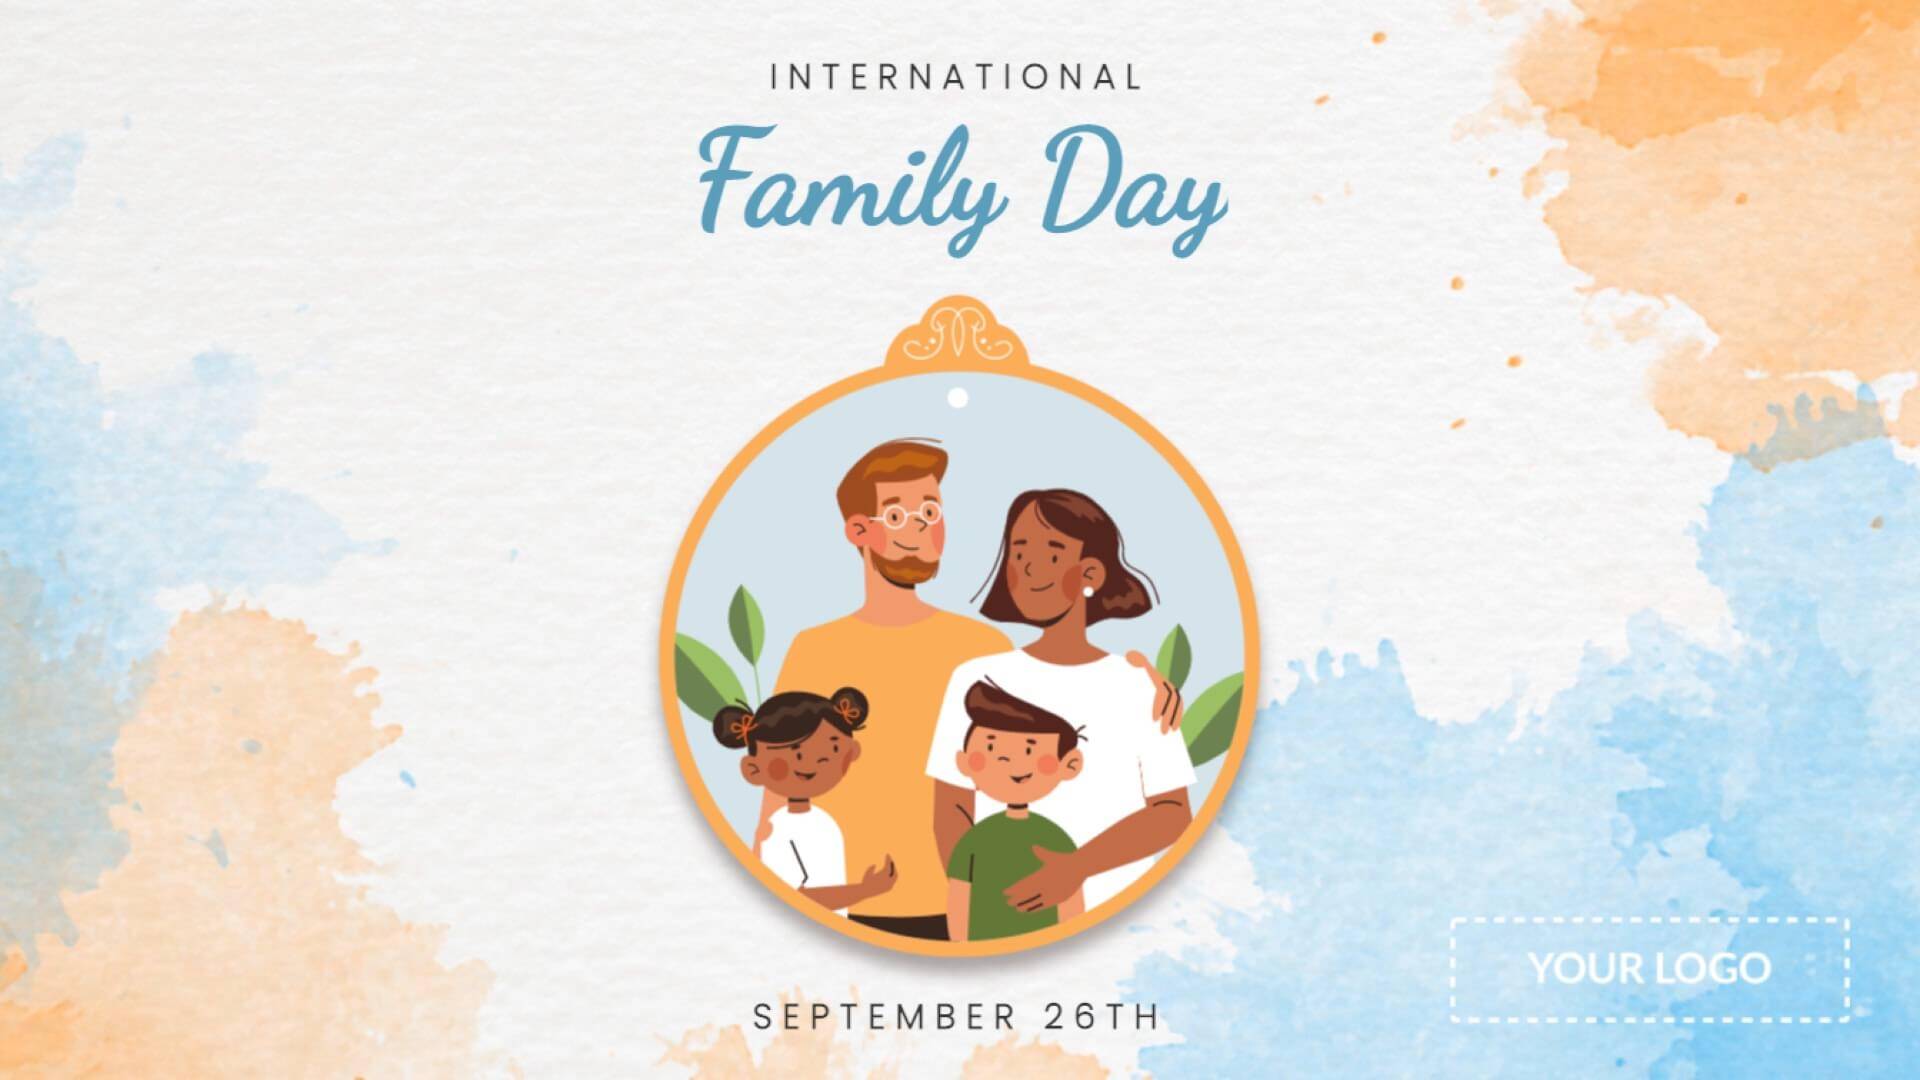 International Family Day Digital Signage Template